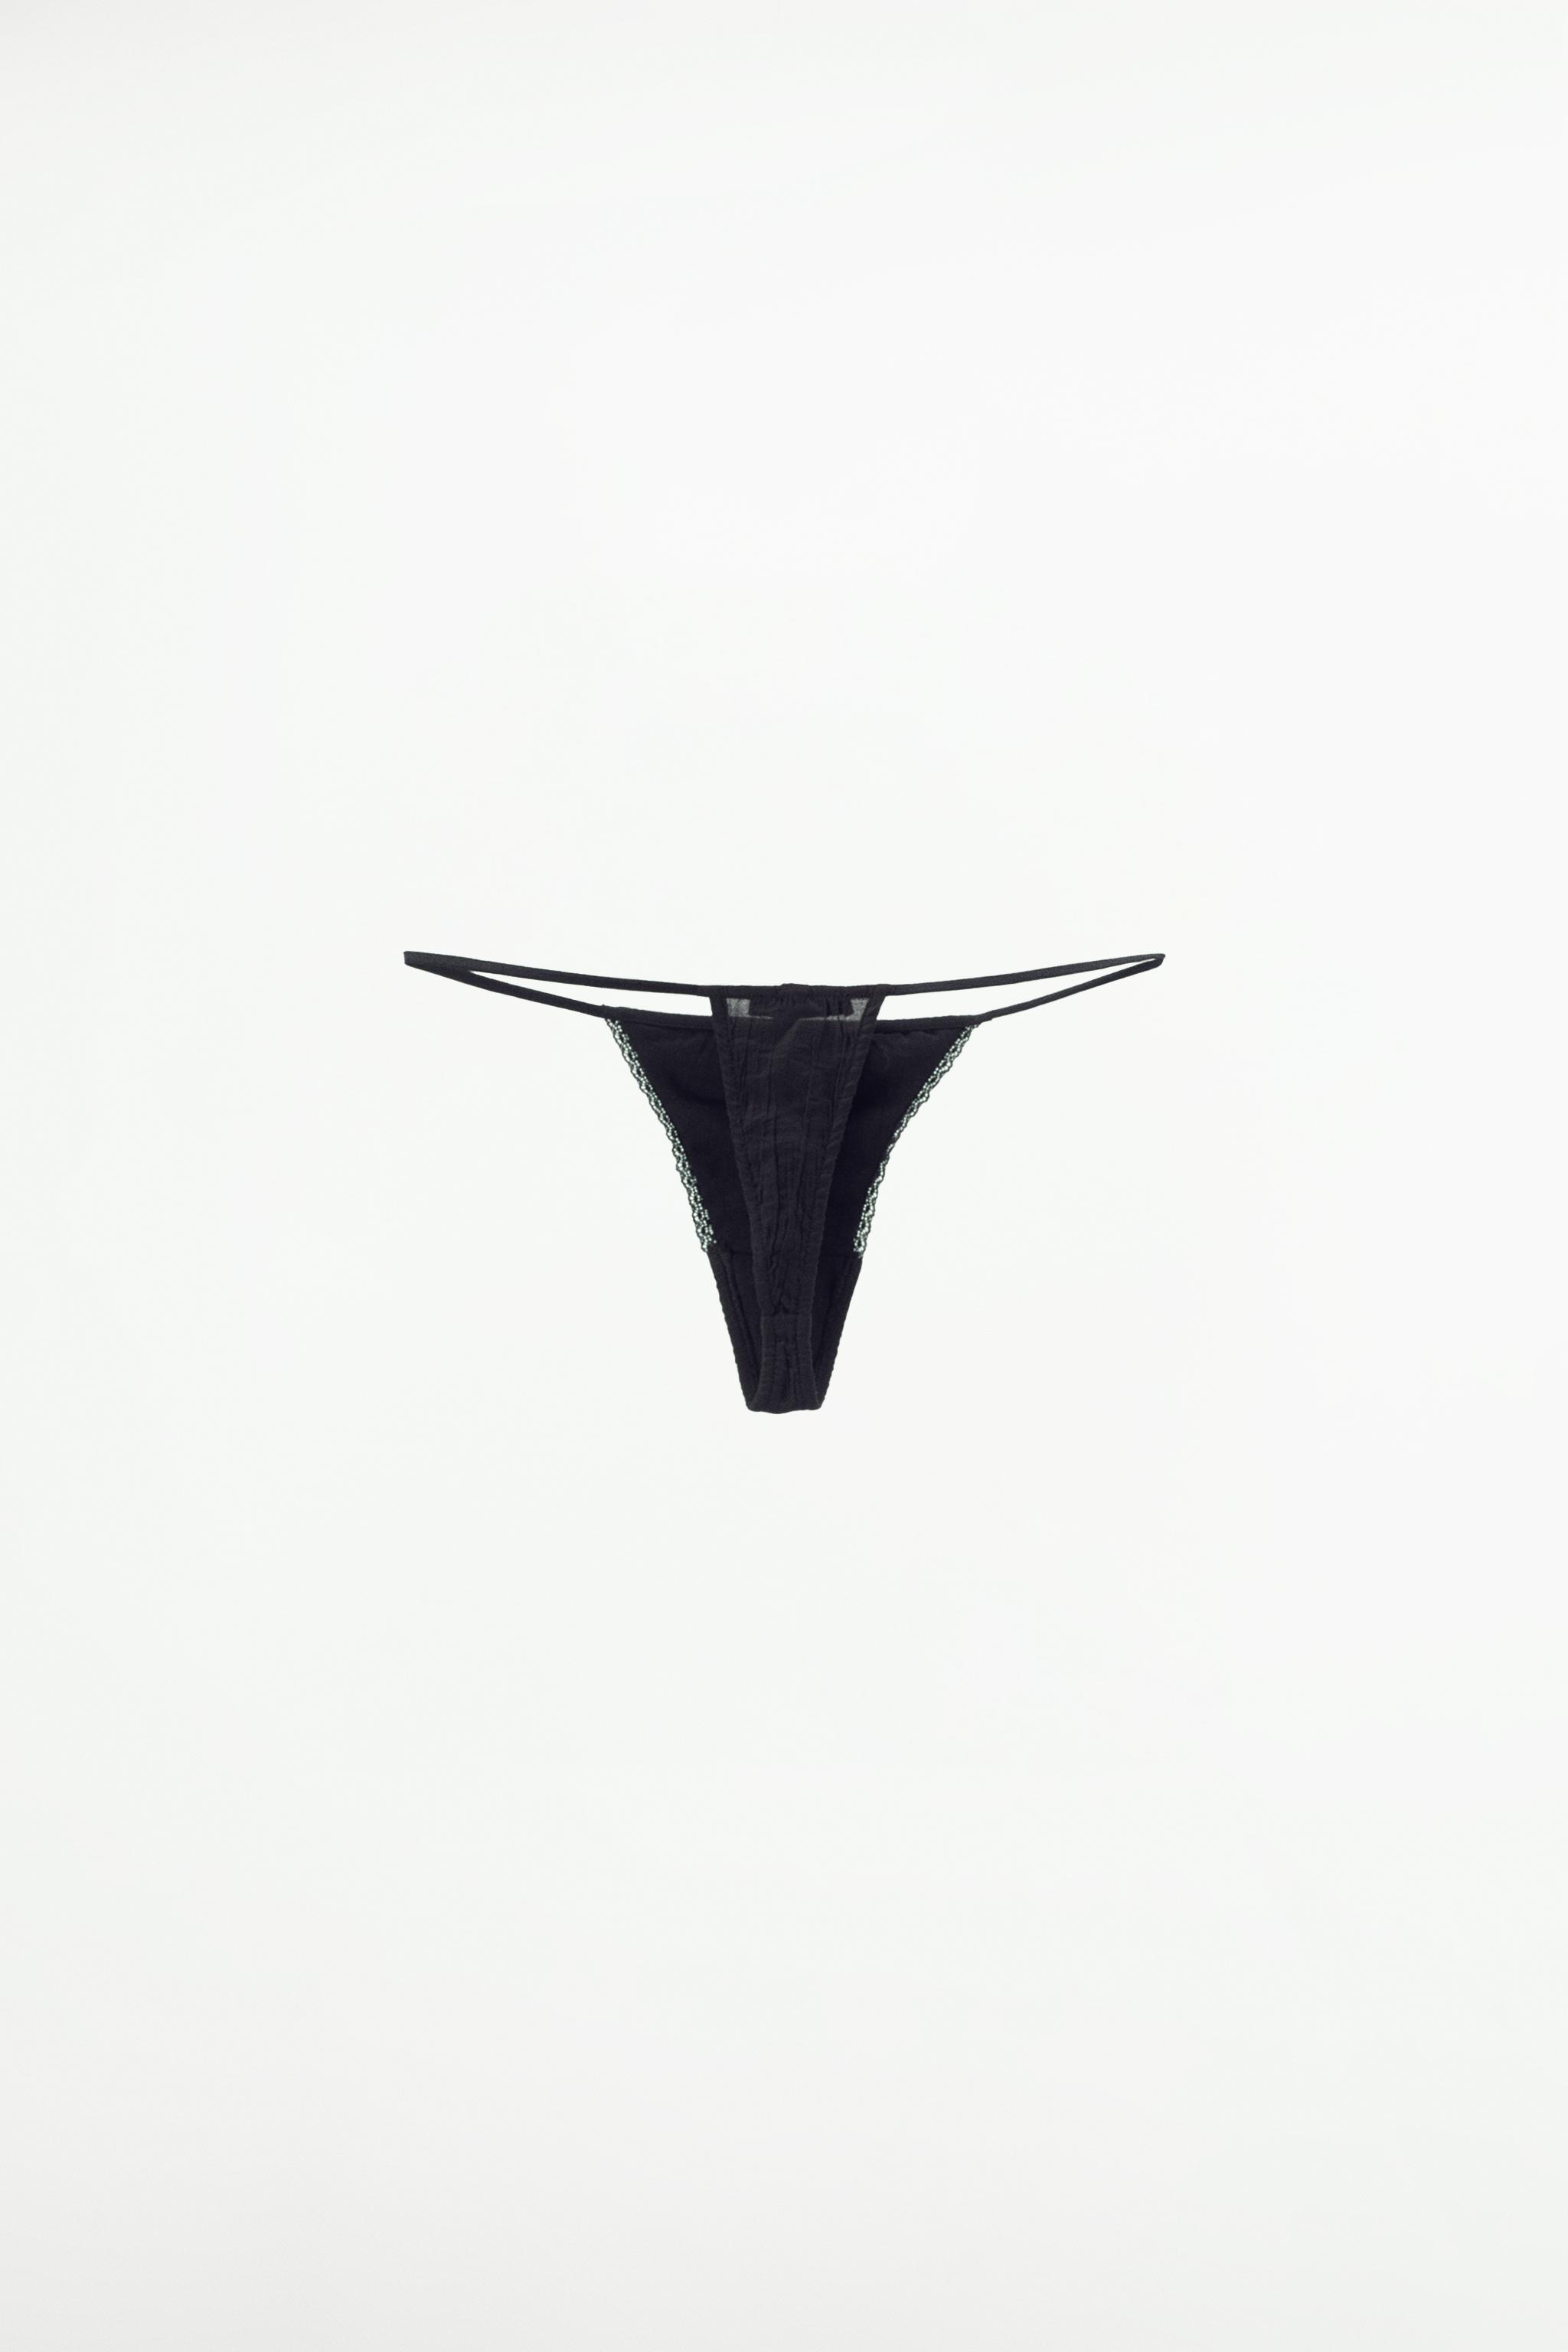 TEXTURED LACE THONG - Black